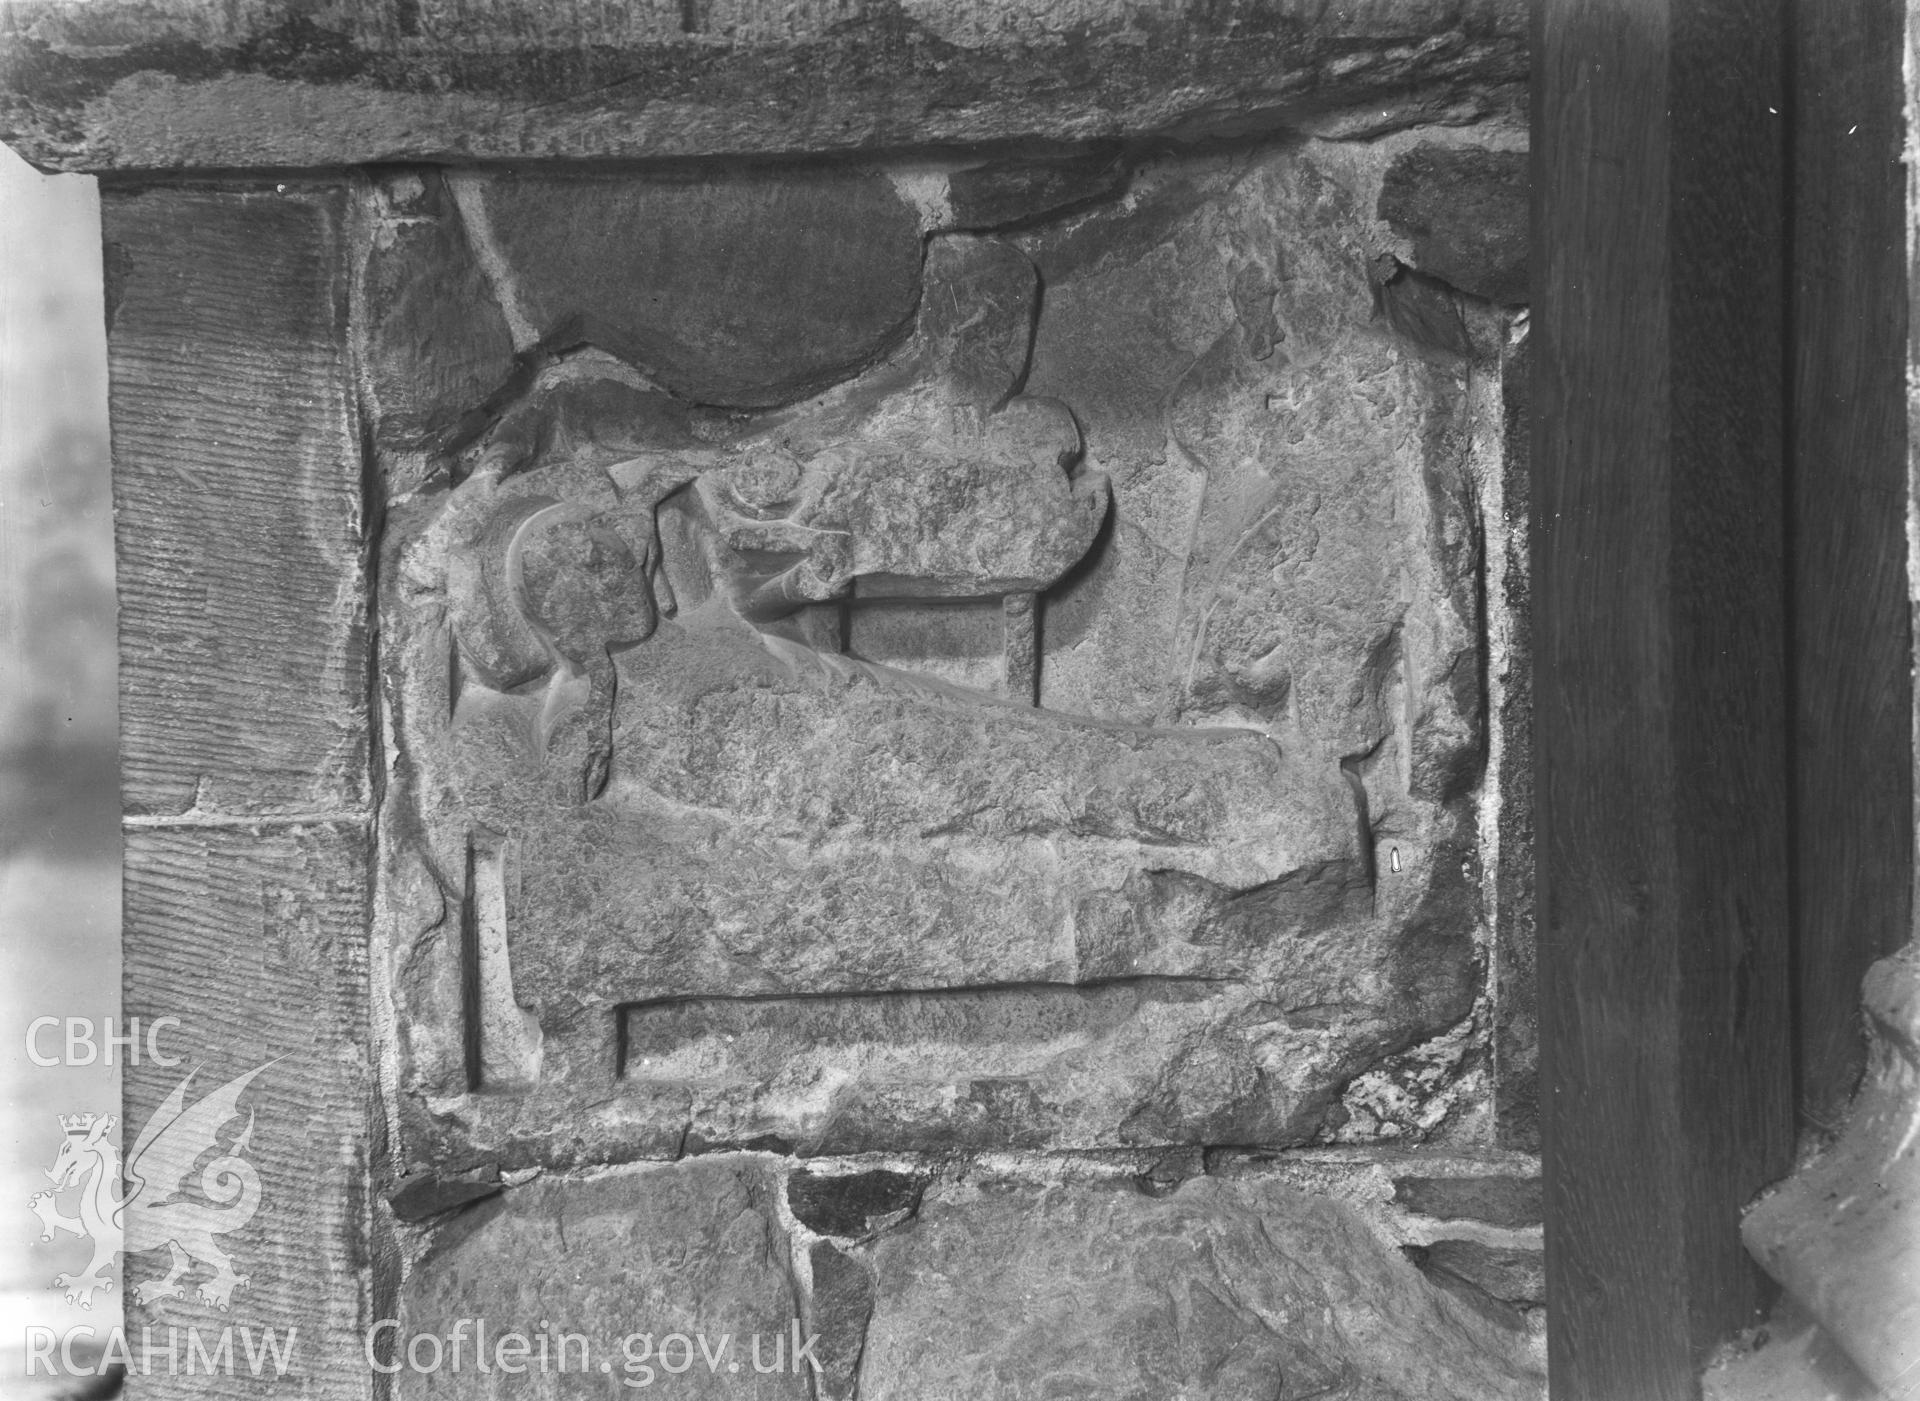 Digital copy of a black and white acetate negative showing view of sculpted stone inserted into external wall at St. David's Cathedral, taken by E.W. Lovegrove, July 1936.